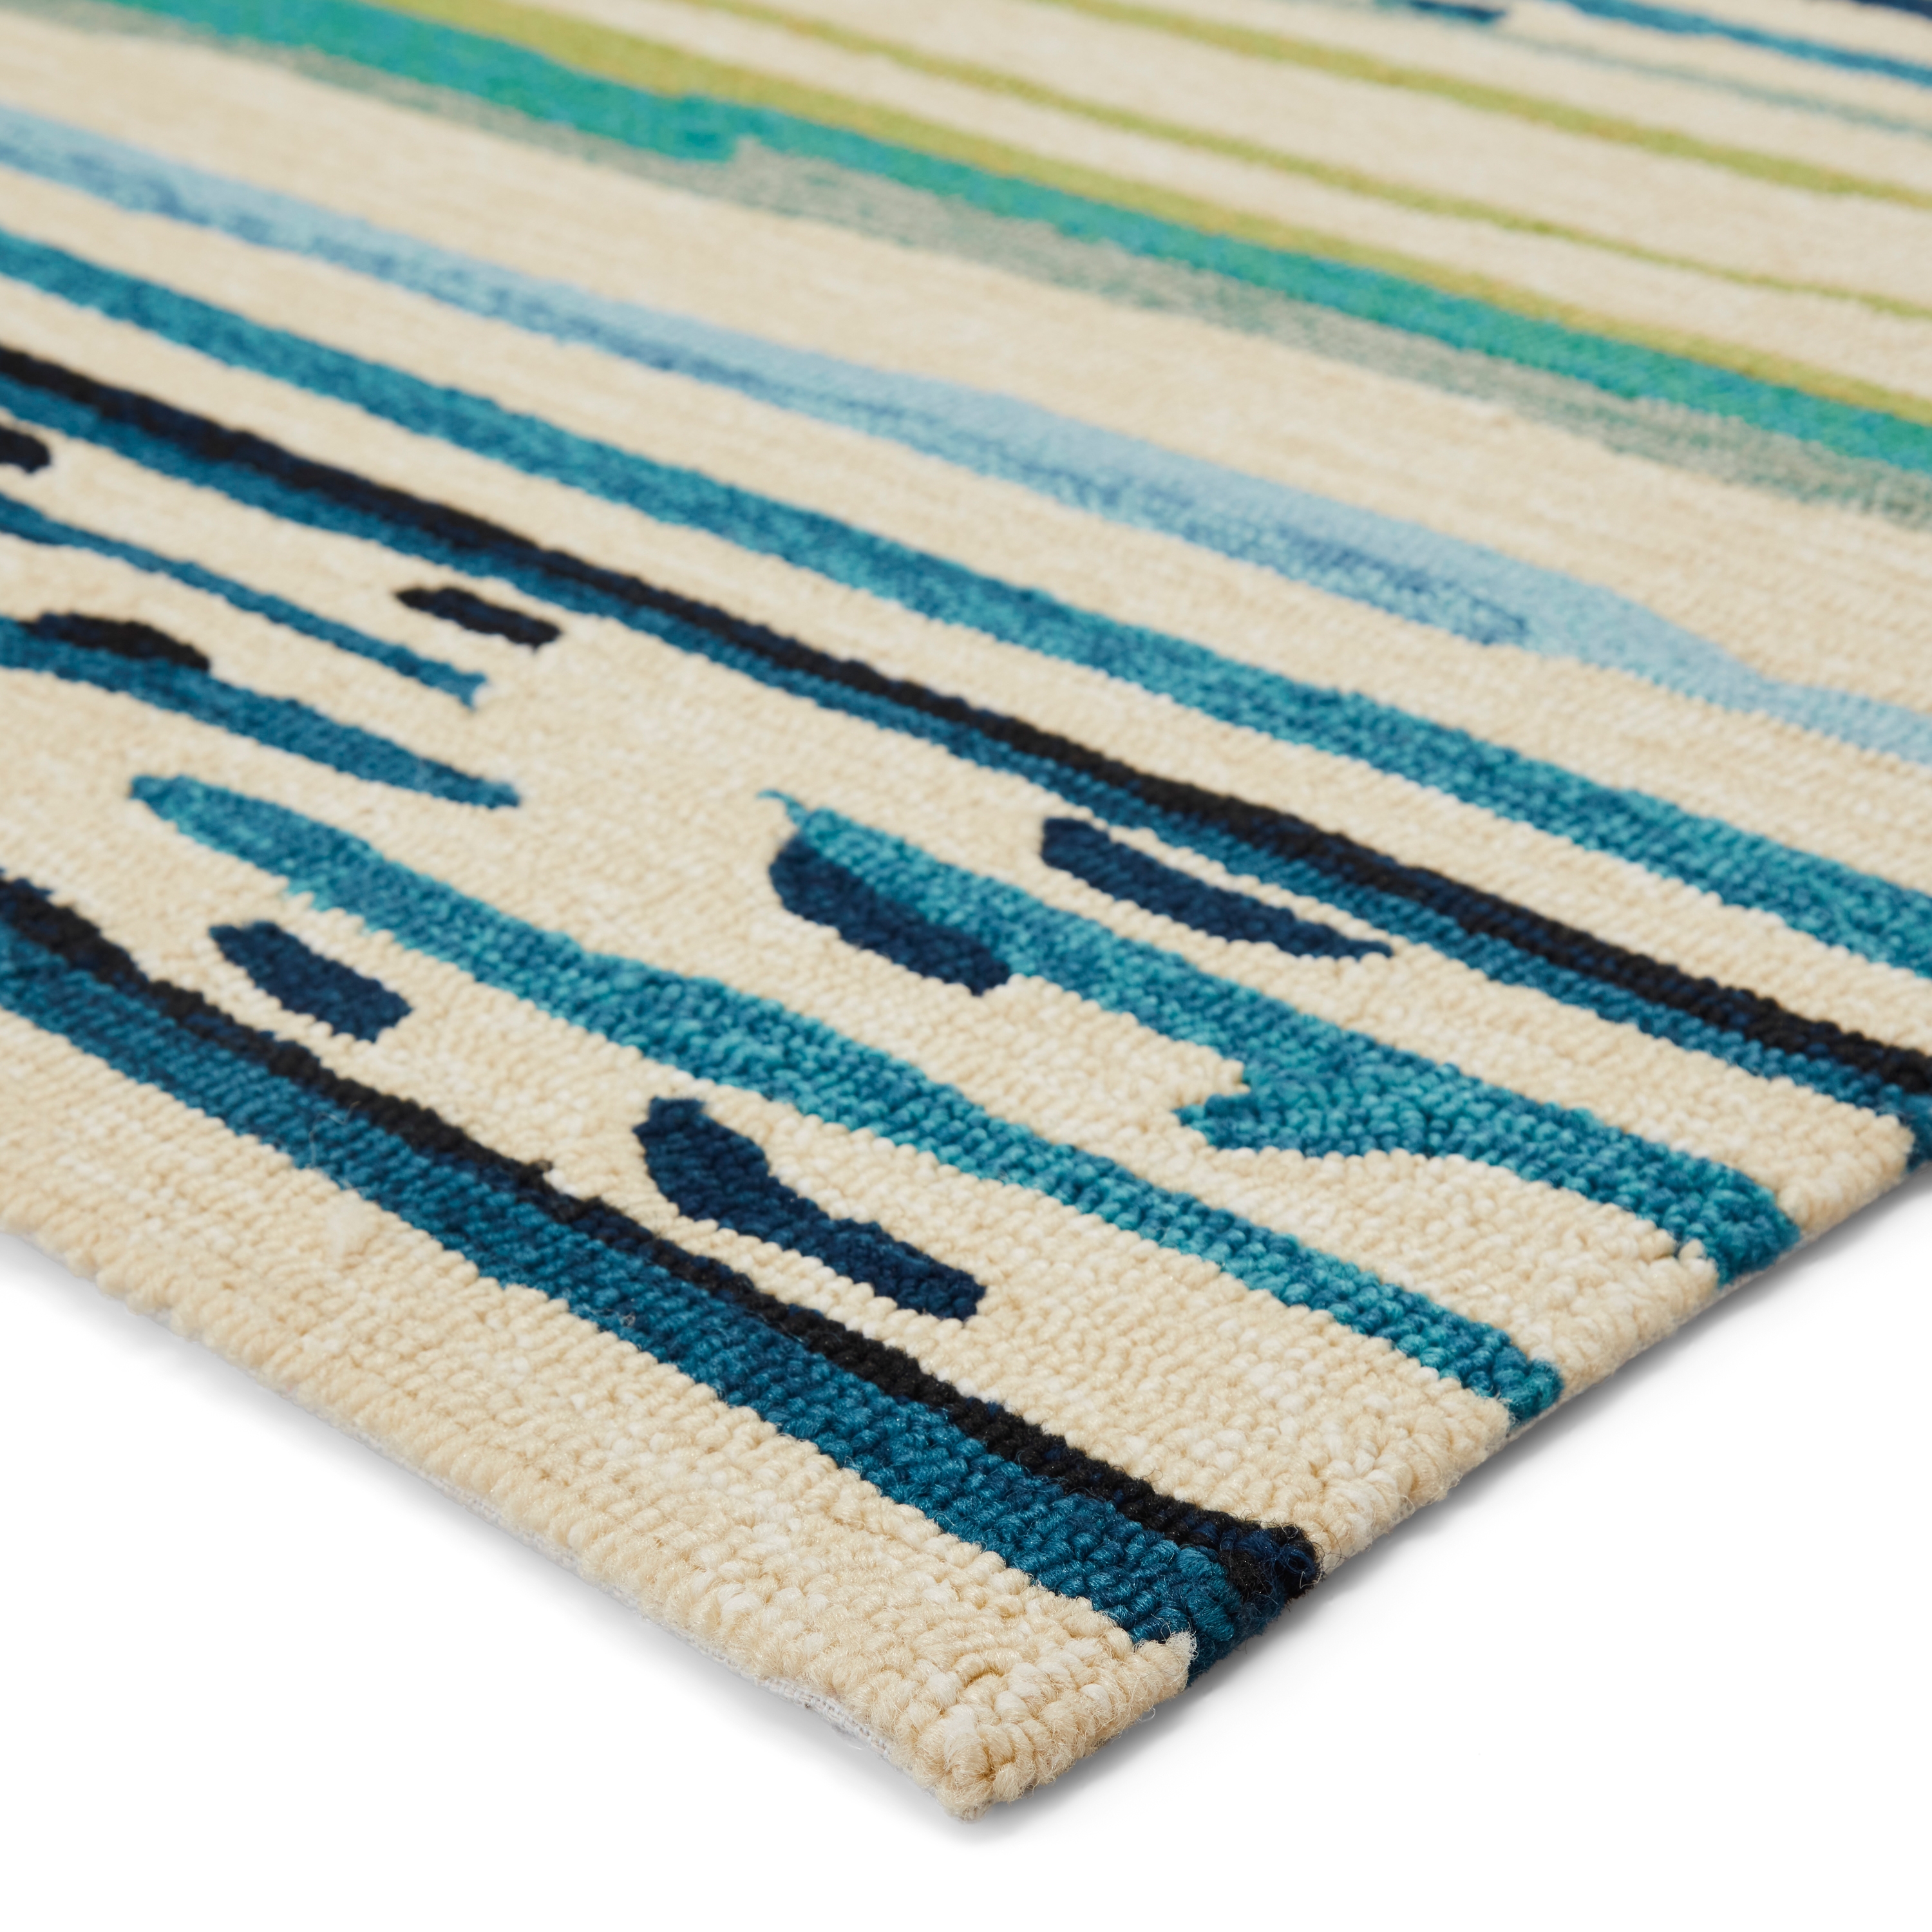 Sketchy Lines Indoor/ Outdoor Abstract Blue/ Green Area Rug (9' X 12') - Image 1